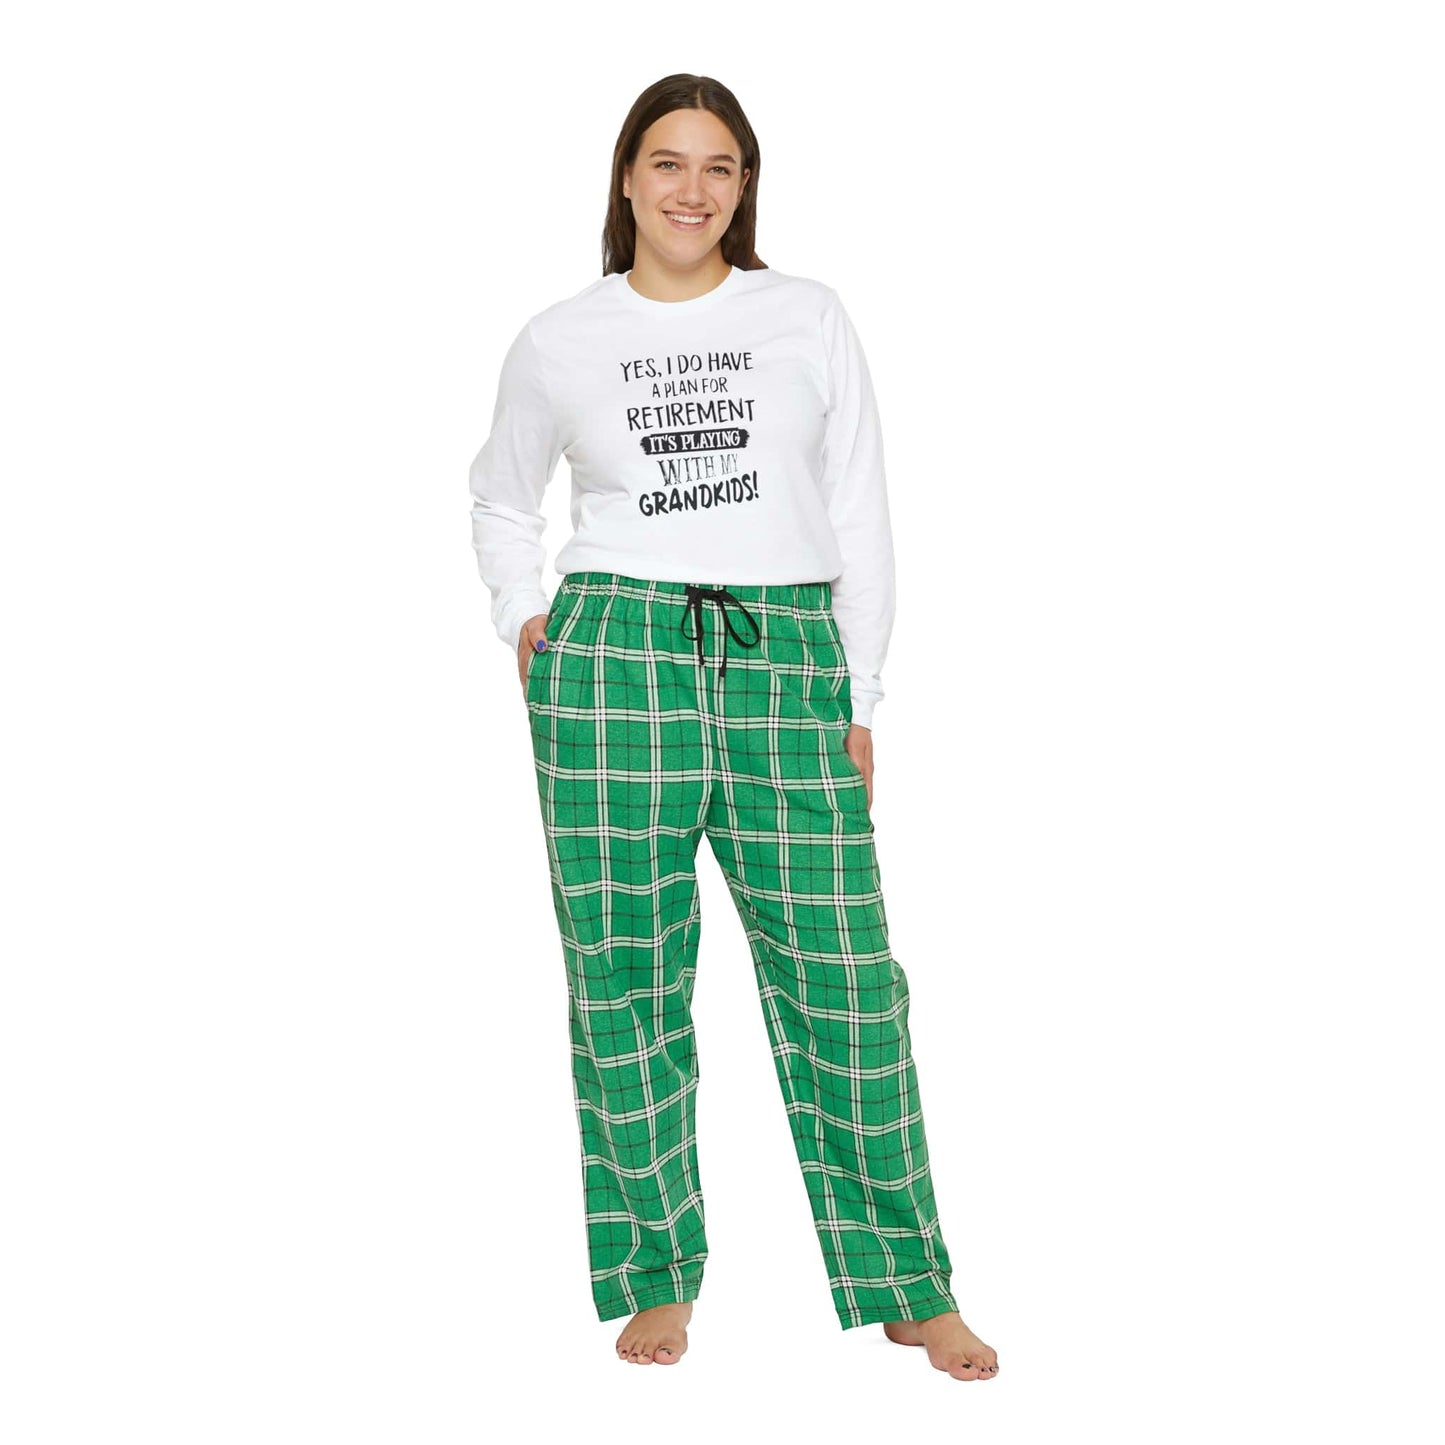 Yes, I Do Have A Plan For Retirement Women's Long Sleeve Pajama Set